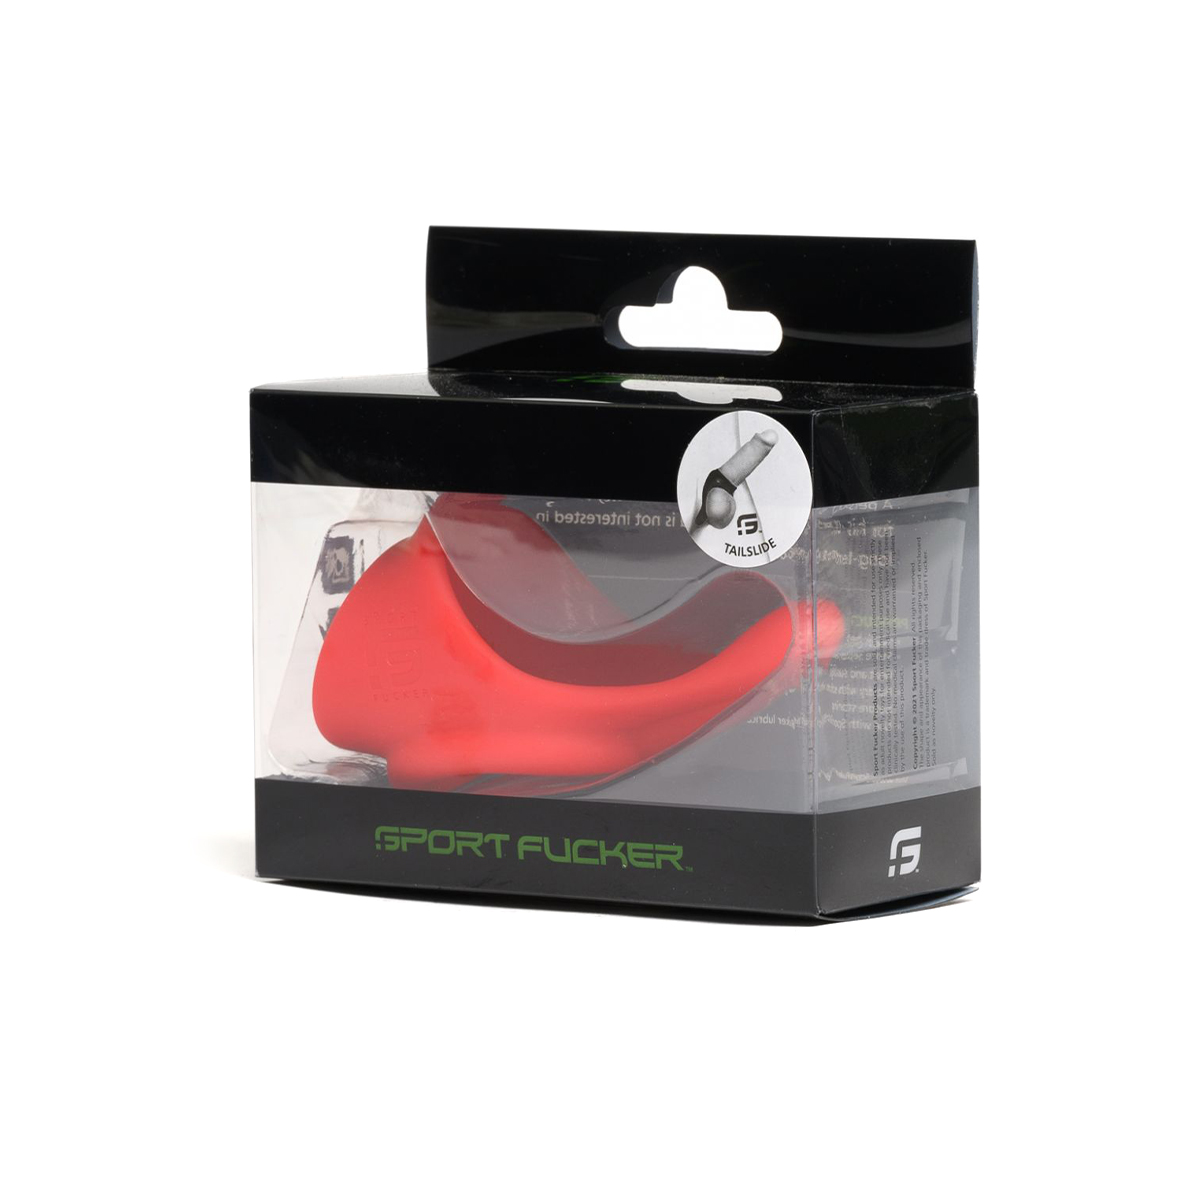 Sport-Fucker-Tailslide-Silicone-Cocksling-Red-OPR-2870153-2